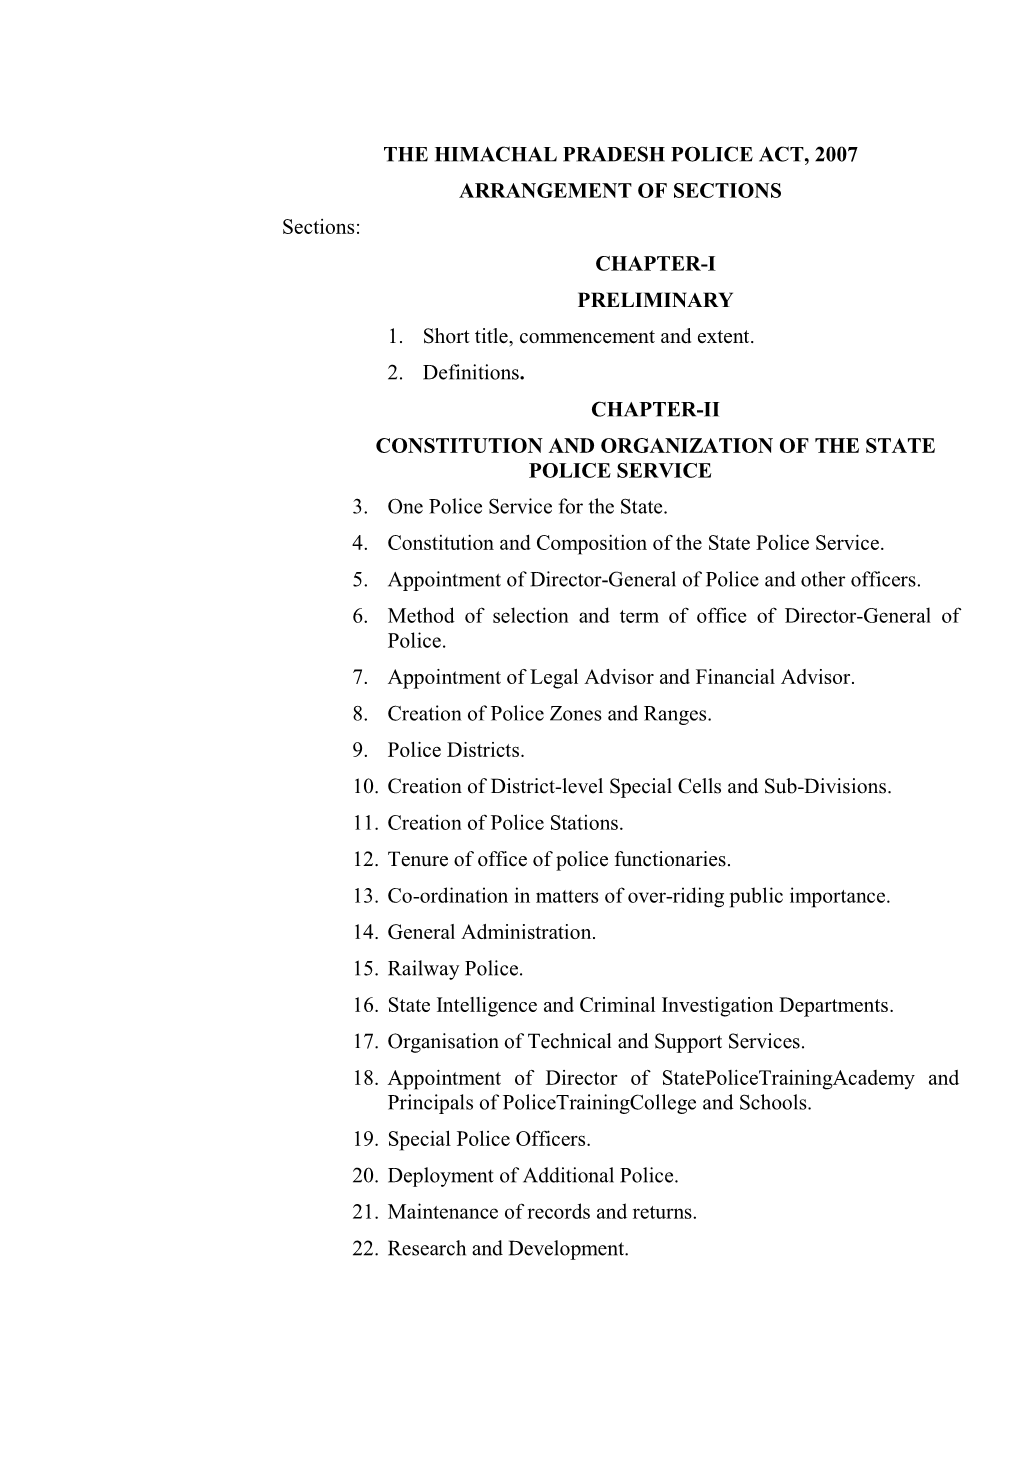 THE HIMACHAL PRADESH POLICE ACT, 2007 ARRANGEMENT of SECTIONS Sections: CHAPTER-I PRELIMINARY 1